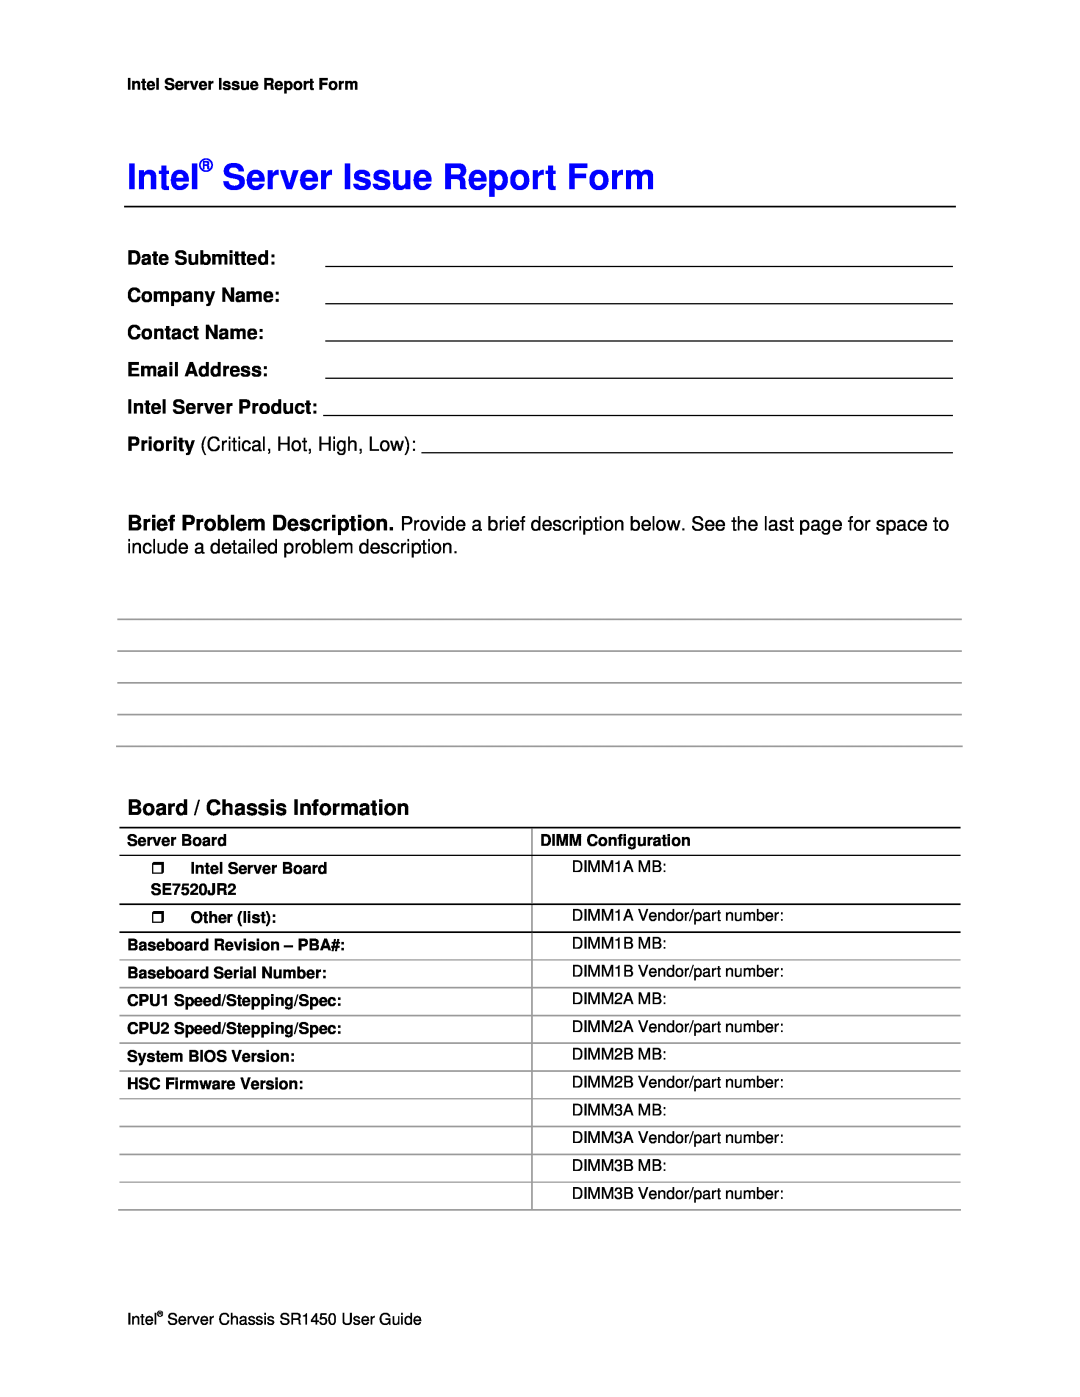 Intel SR1450 manual Intel Server Issue Report Form, Board / Chassis Information, Date Submitted Company Name Contact Name 